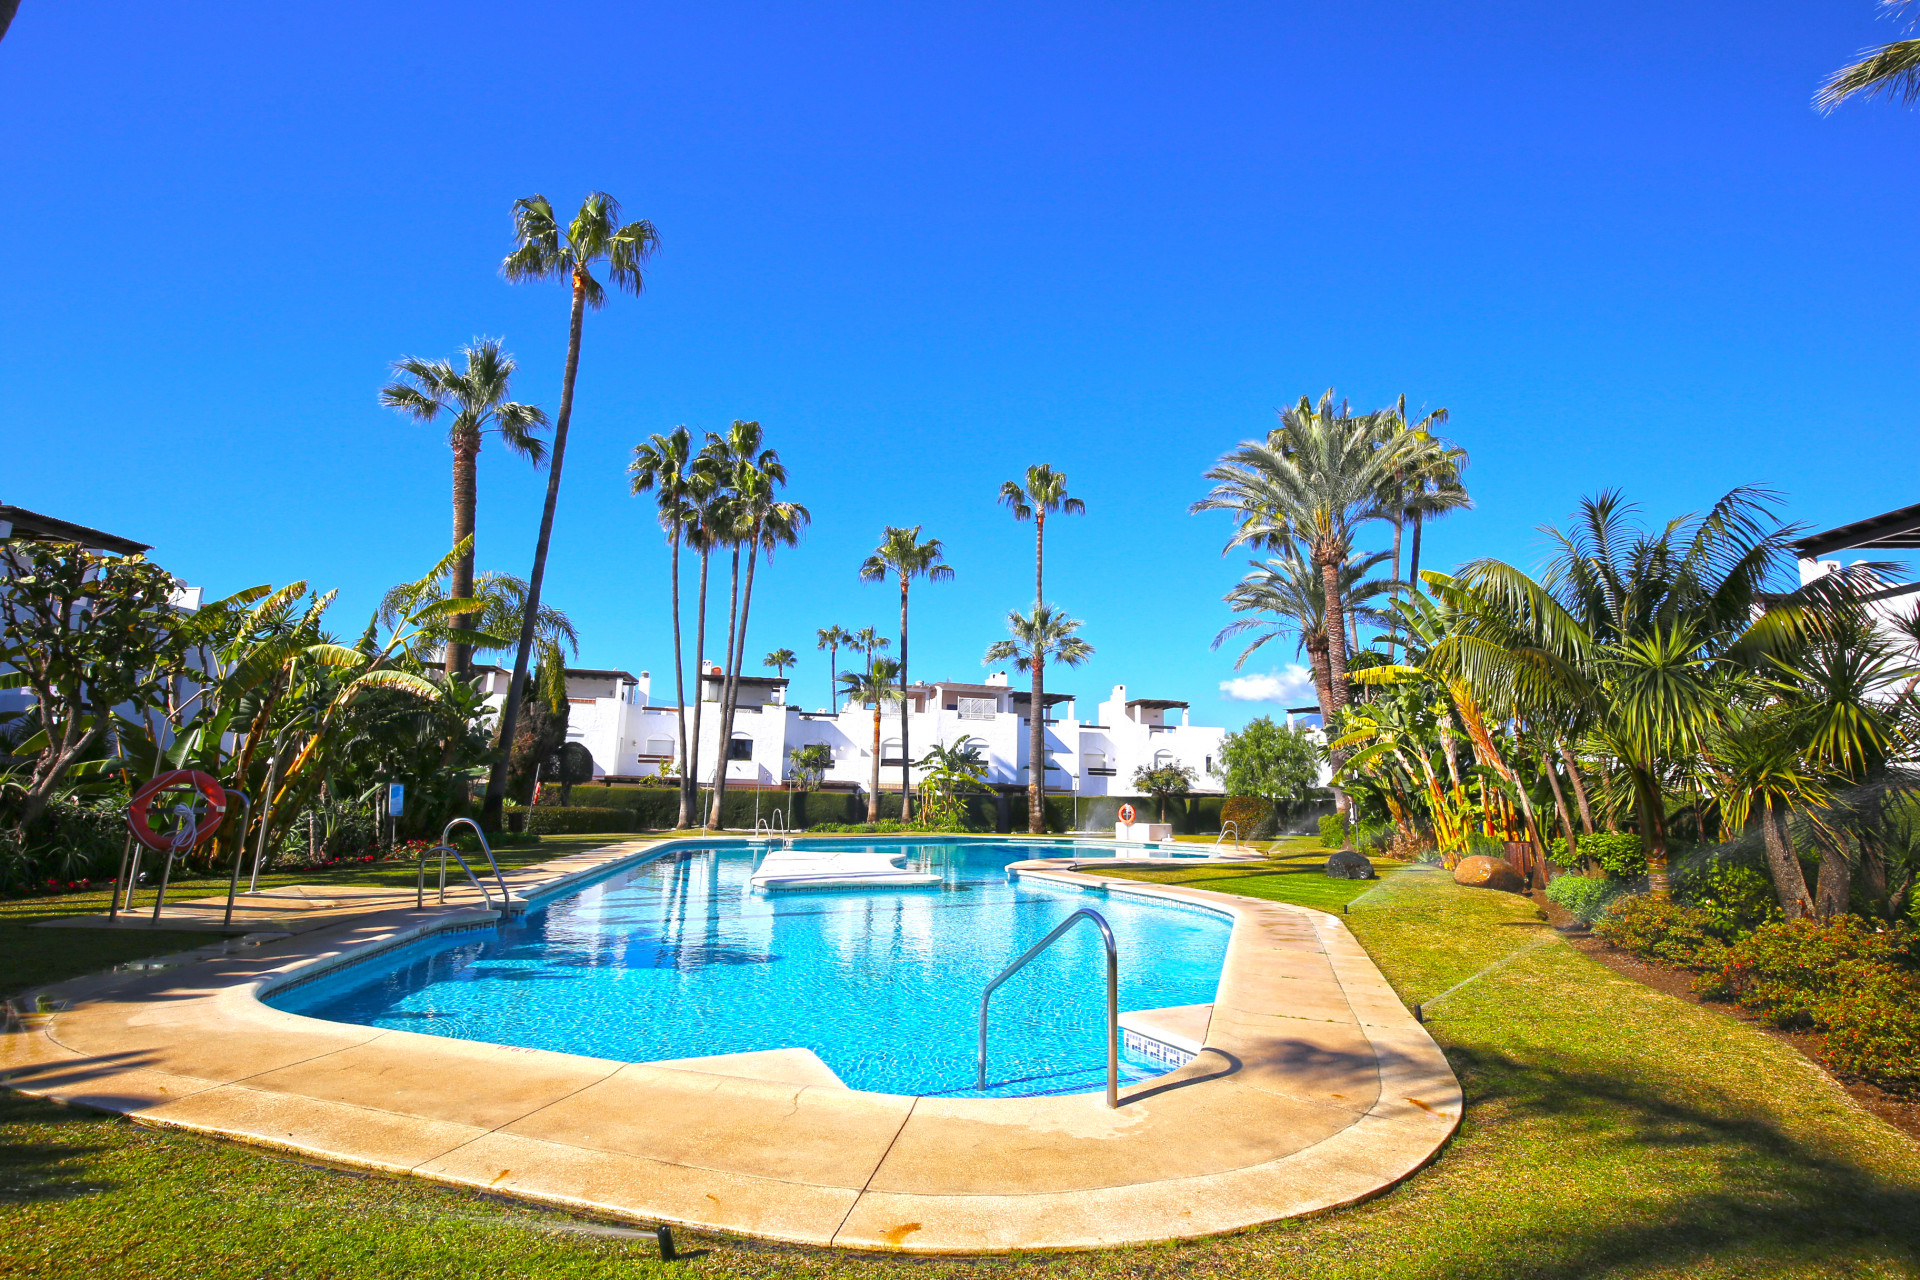 Well located four bedroom townhouse in Guadalvillas, Guadalmina Baja